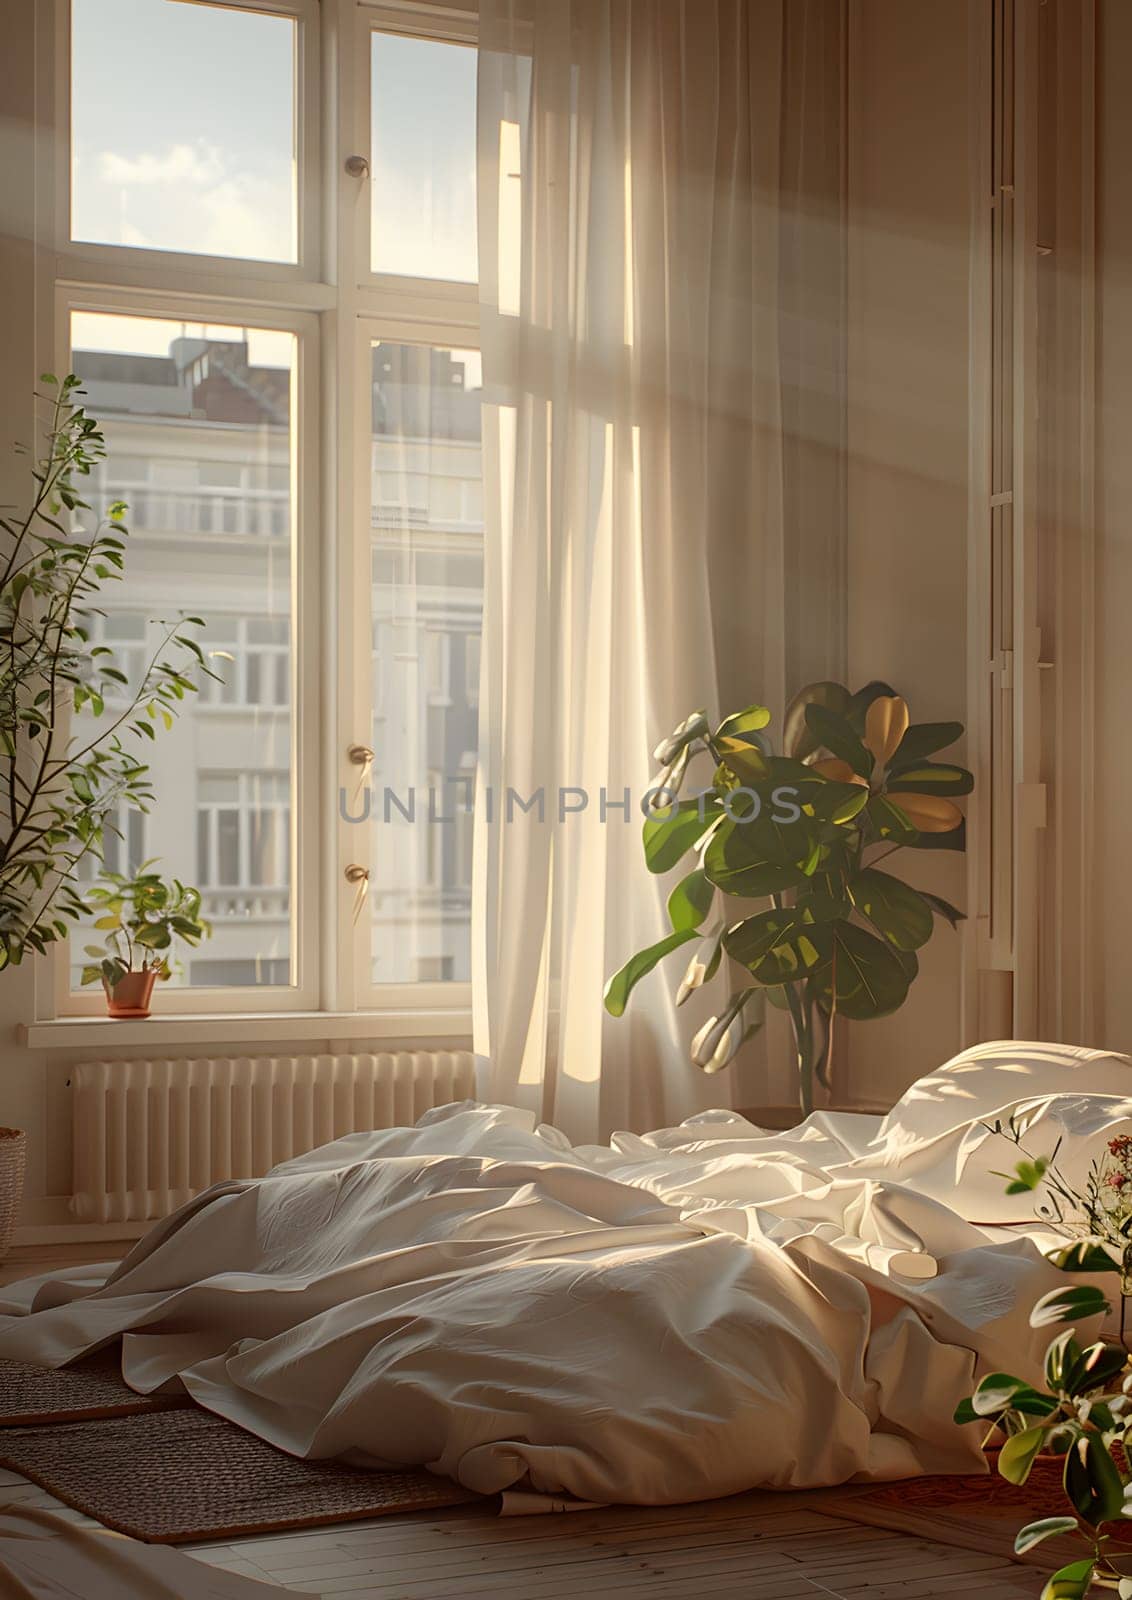 Cozy bedroom with wooden bed frame, sun shining through window shades by Nadtochiy